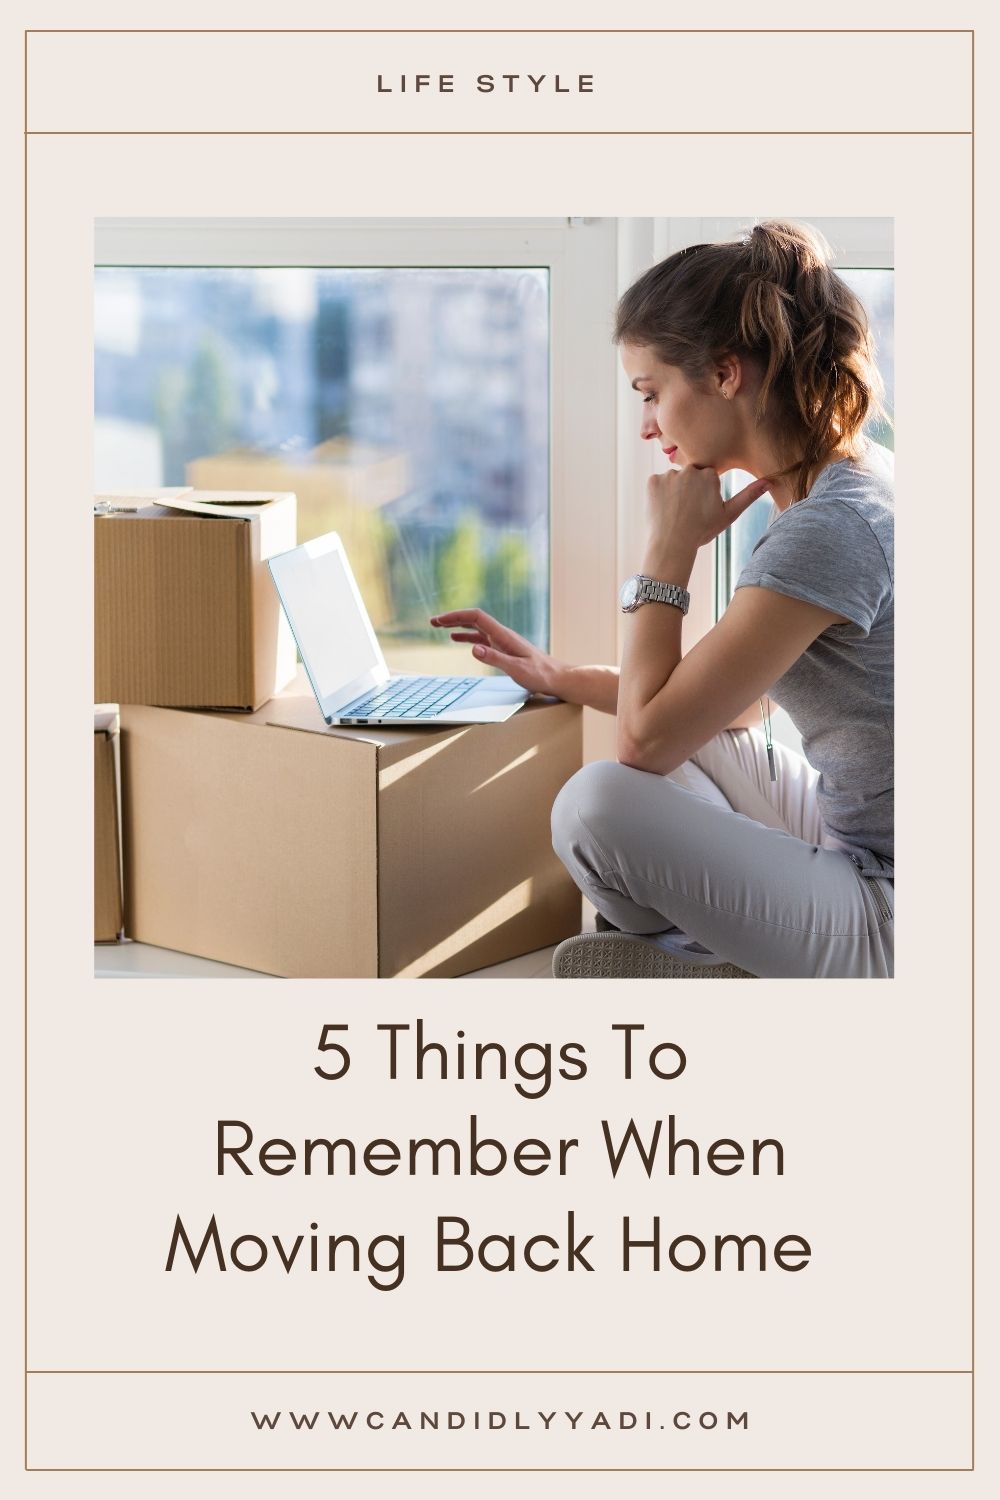 How to find balance when moving back home – 5 things to remember